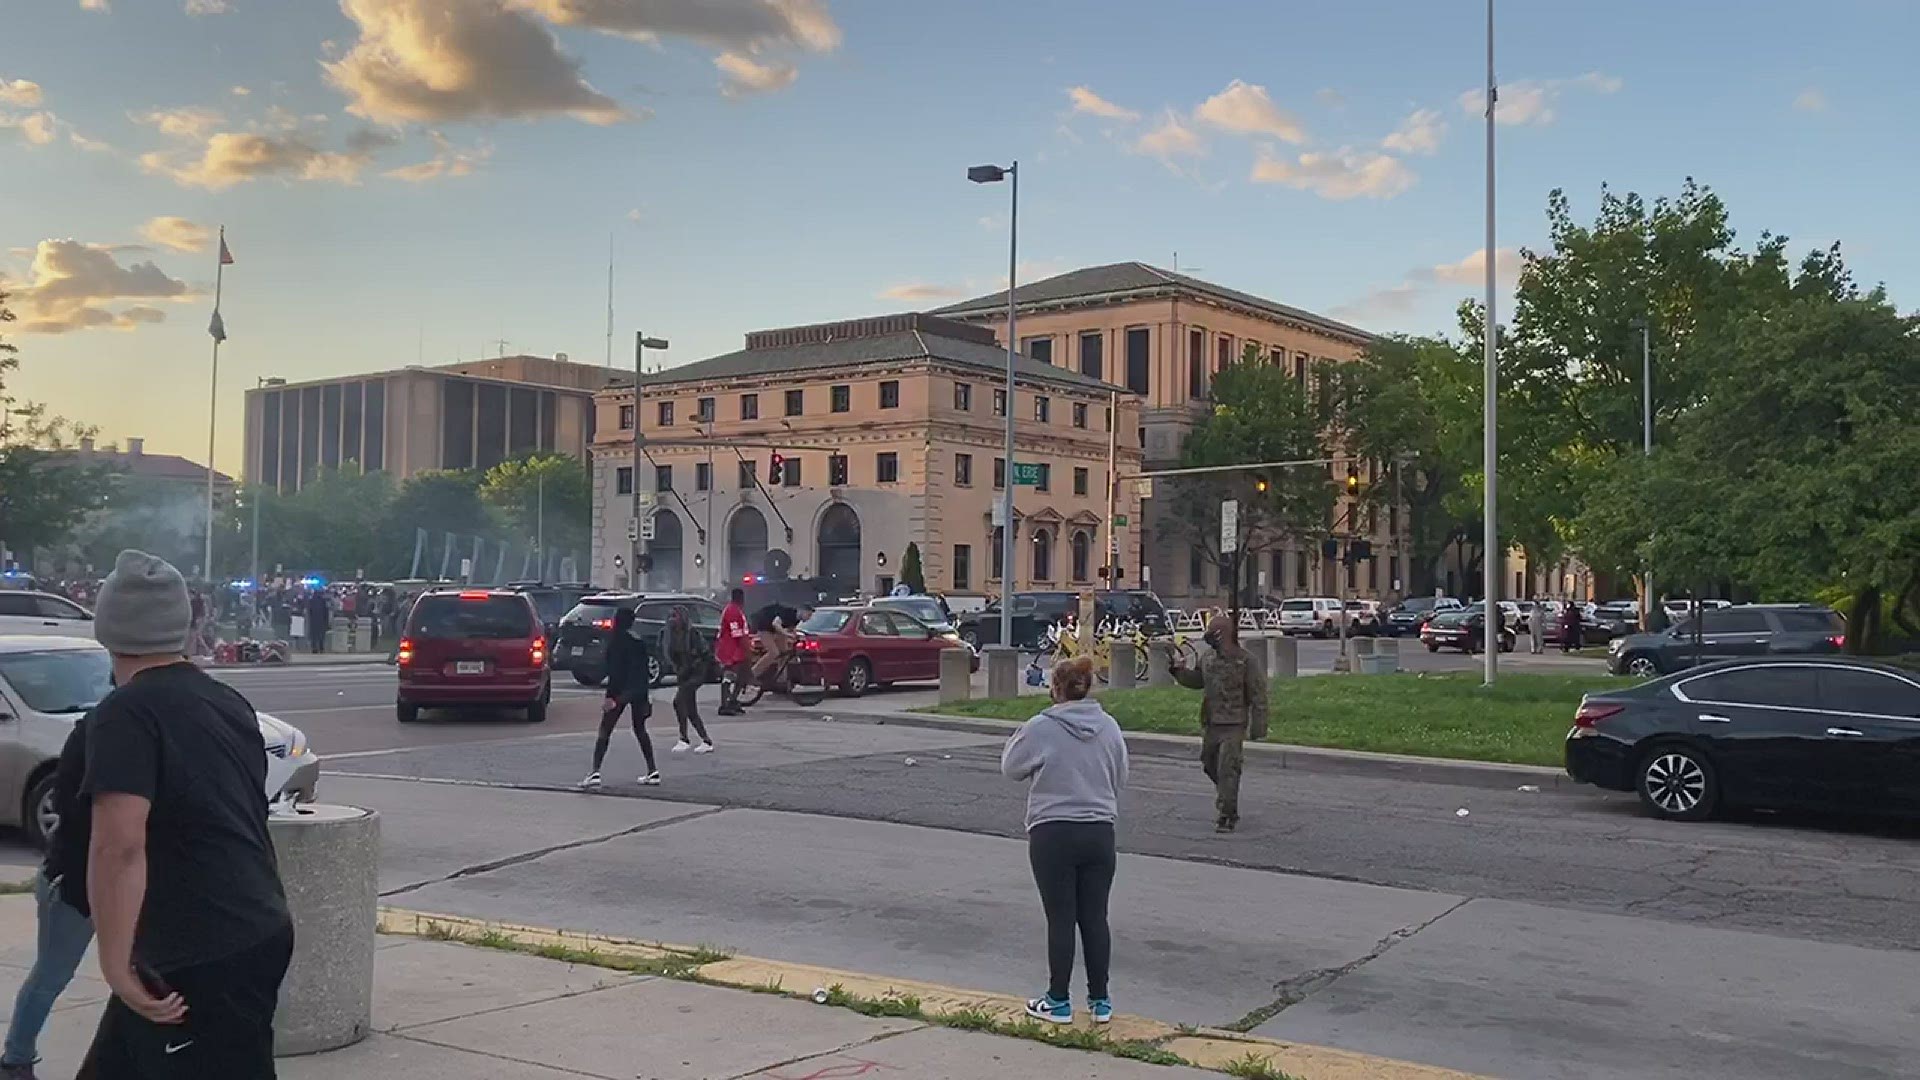 As night fell protesters began setting off fireworks in front of Toledo Police Headquarters in downtown Toledo.